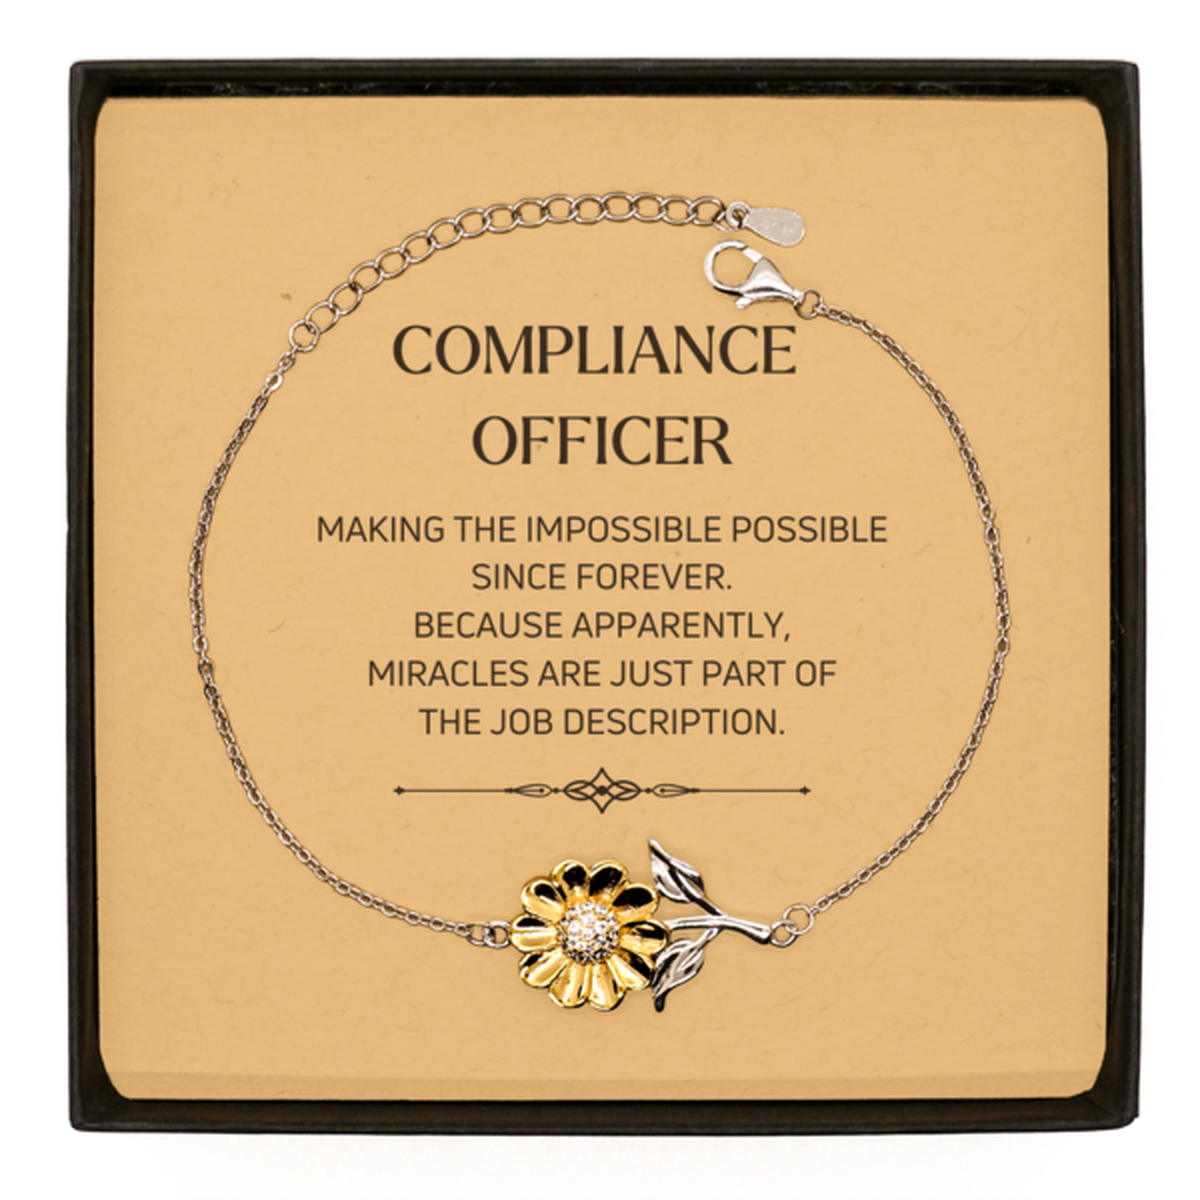 Funny Compliance Officer Gifts, Miracles are just part of the job description, Inspirational Birthday Sunflower Bracelet For Compliance Officer, Men, Women, Coworkers, Friends, Boss